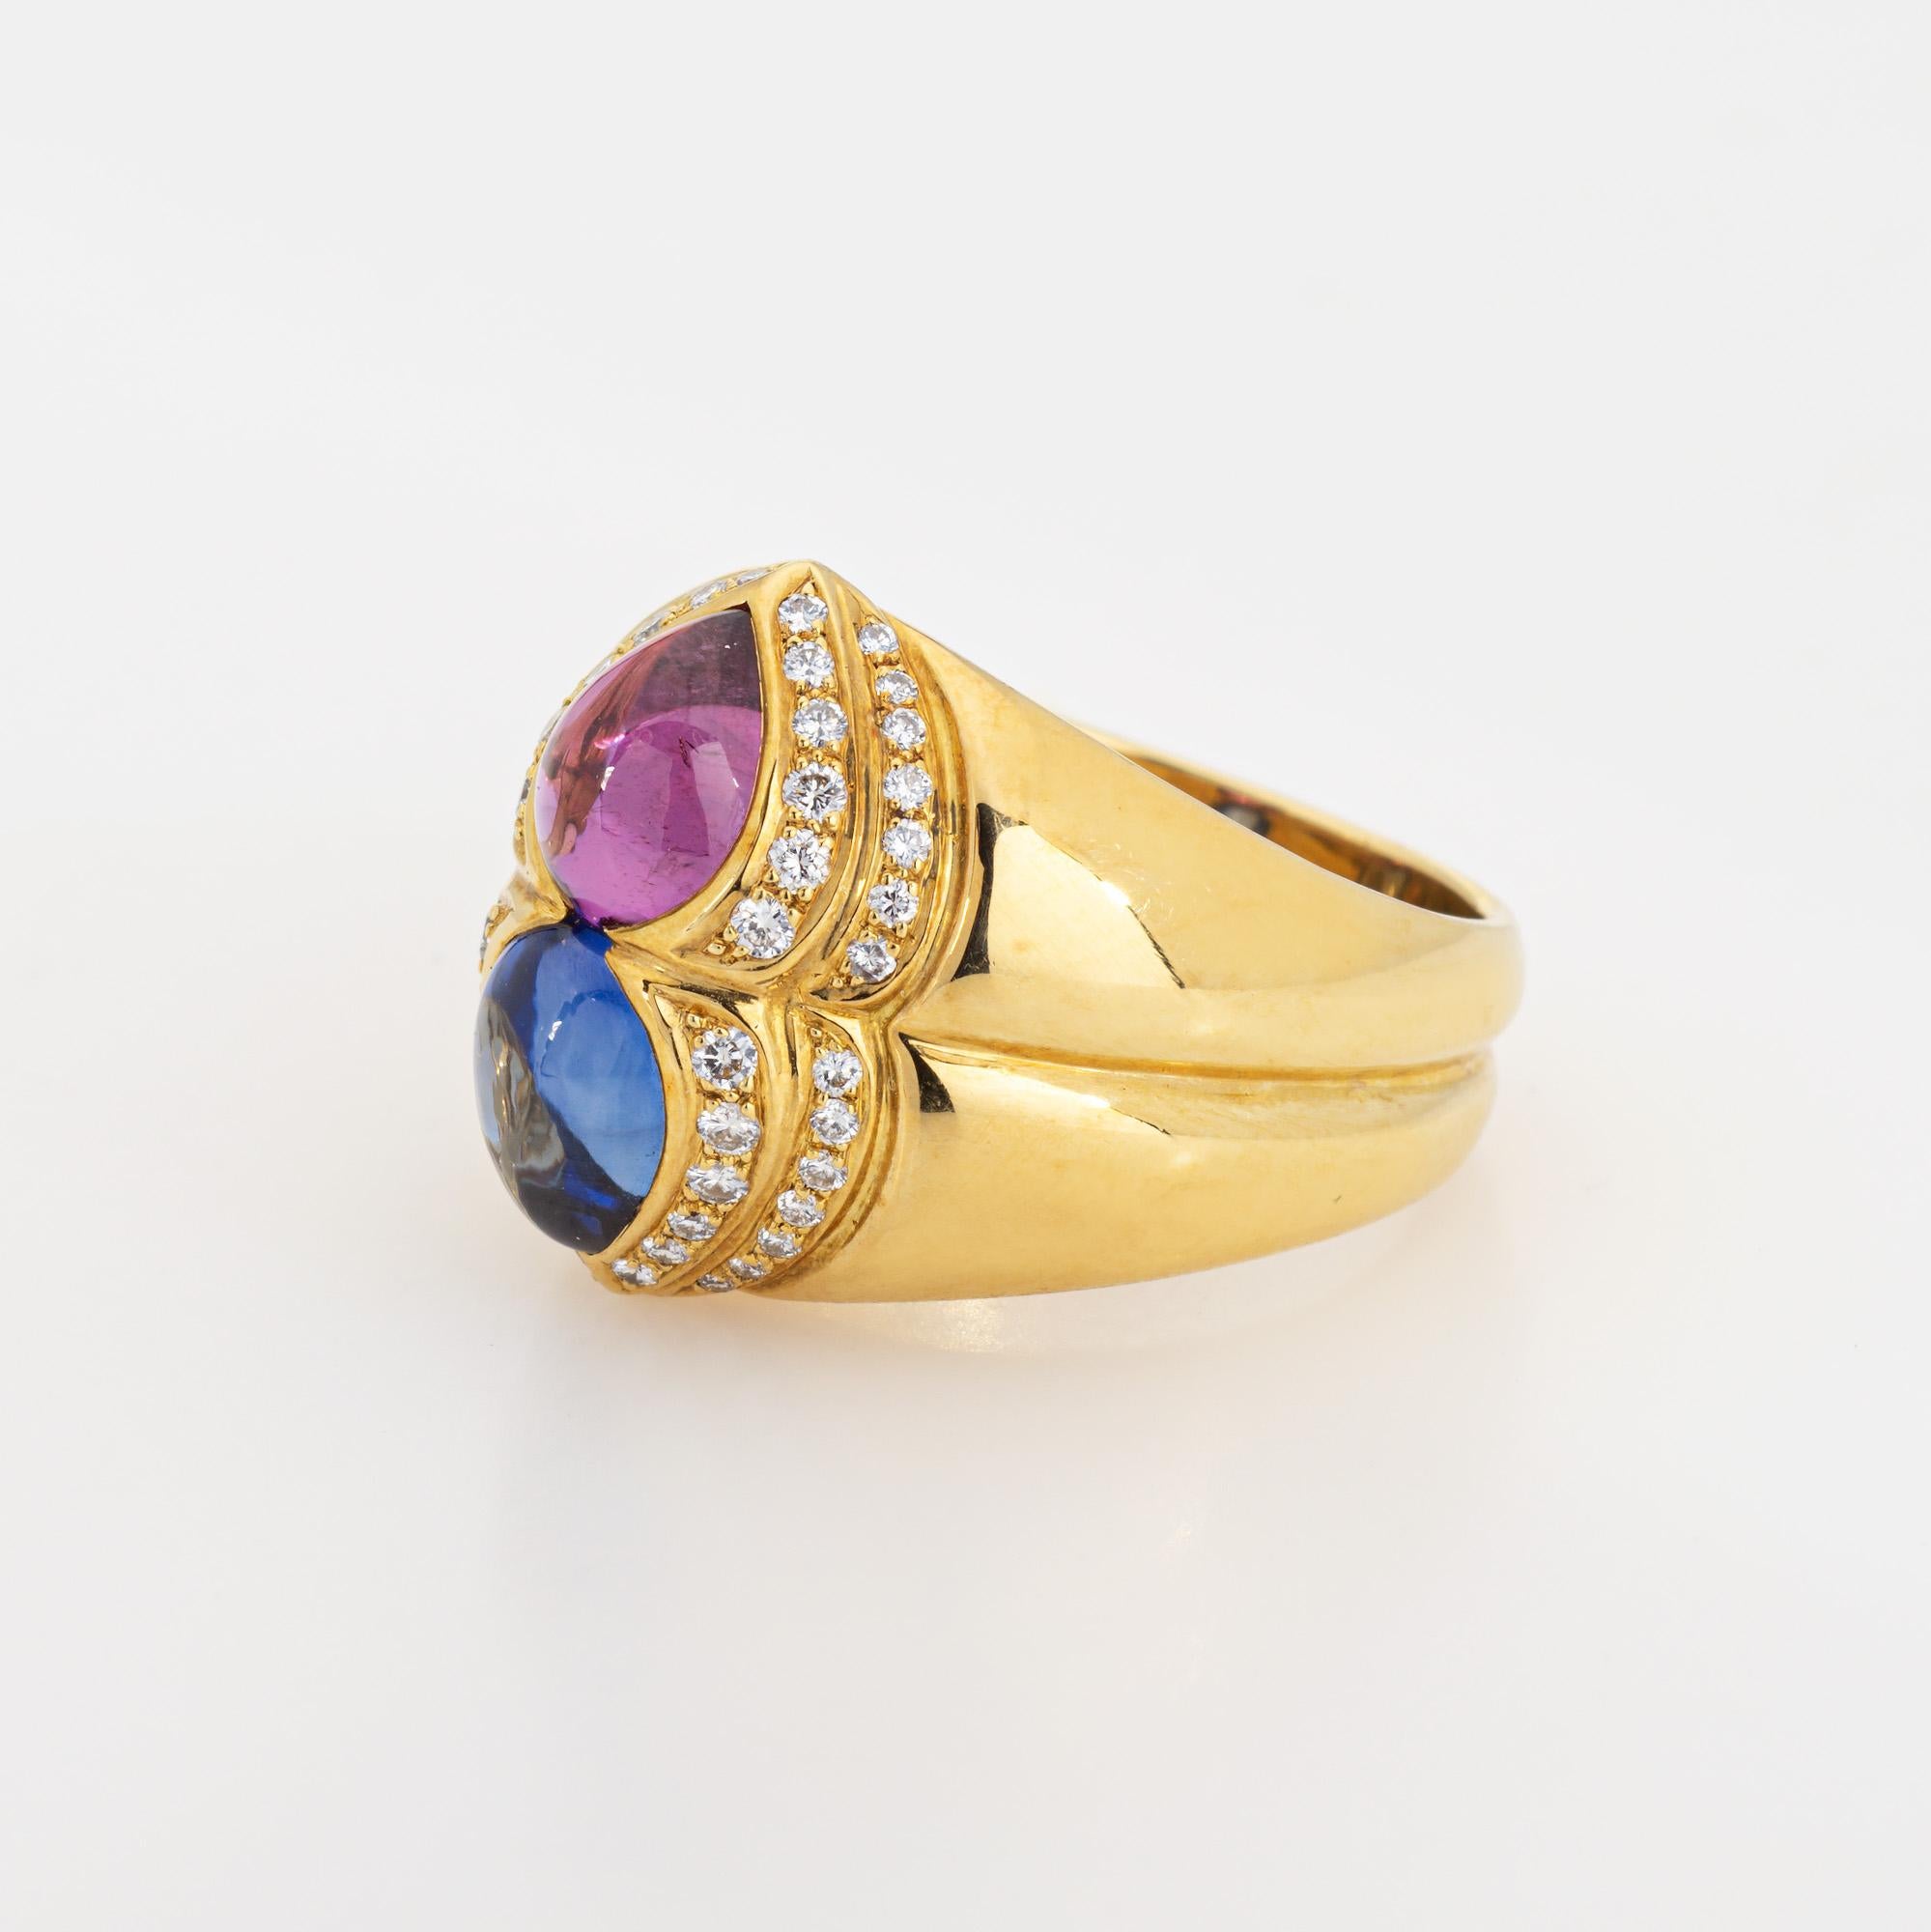 Cabochon Chopard Pink Blue Sapphire Ring Diamond Estate 18k Yellow Gold Sz 6 Band Signed For Sale